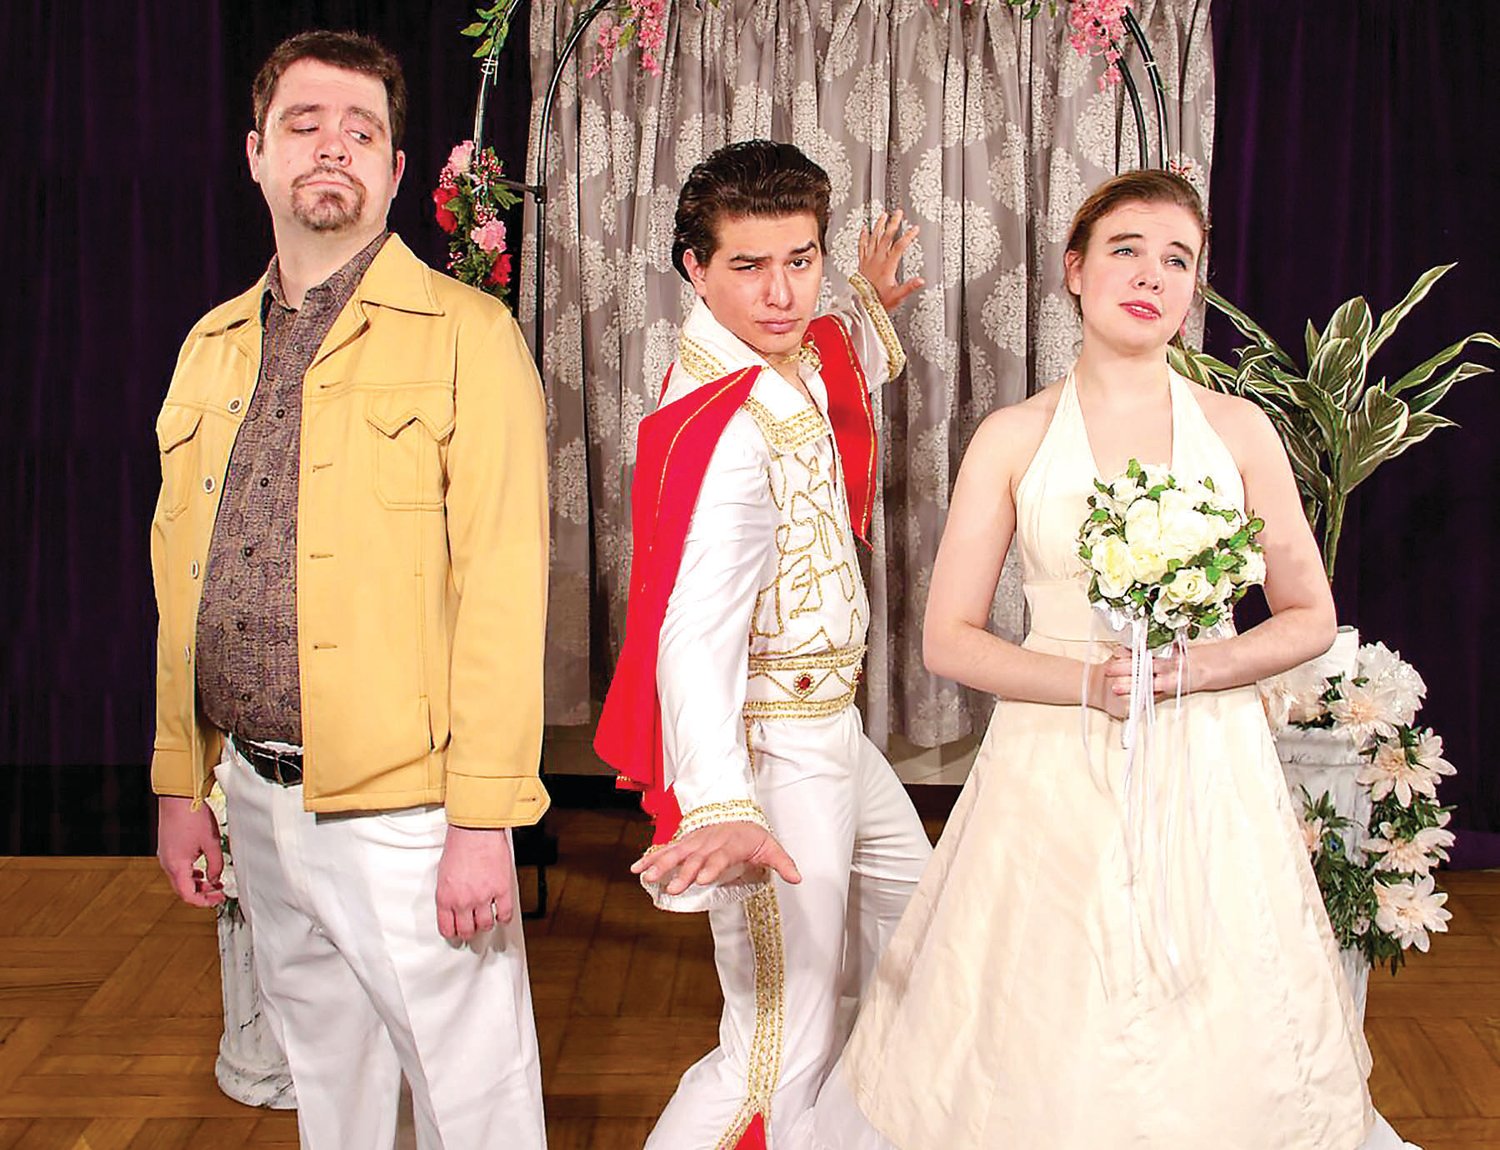 Getting even with the exes are Tim Mora, left, as Stan and Erin Wurtz as Bev. Tristan Takacs is John (a.k.a. Elvis). Photograph by John Maurer